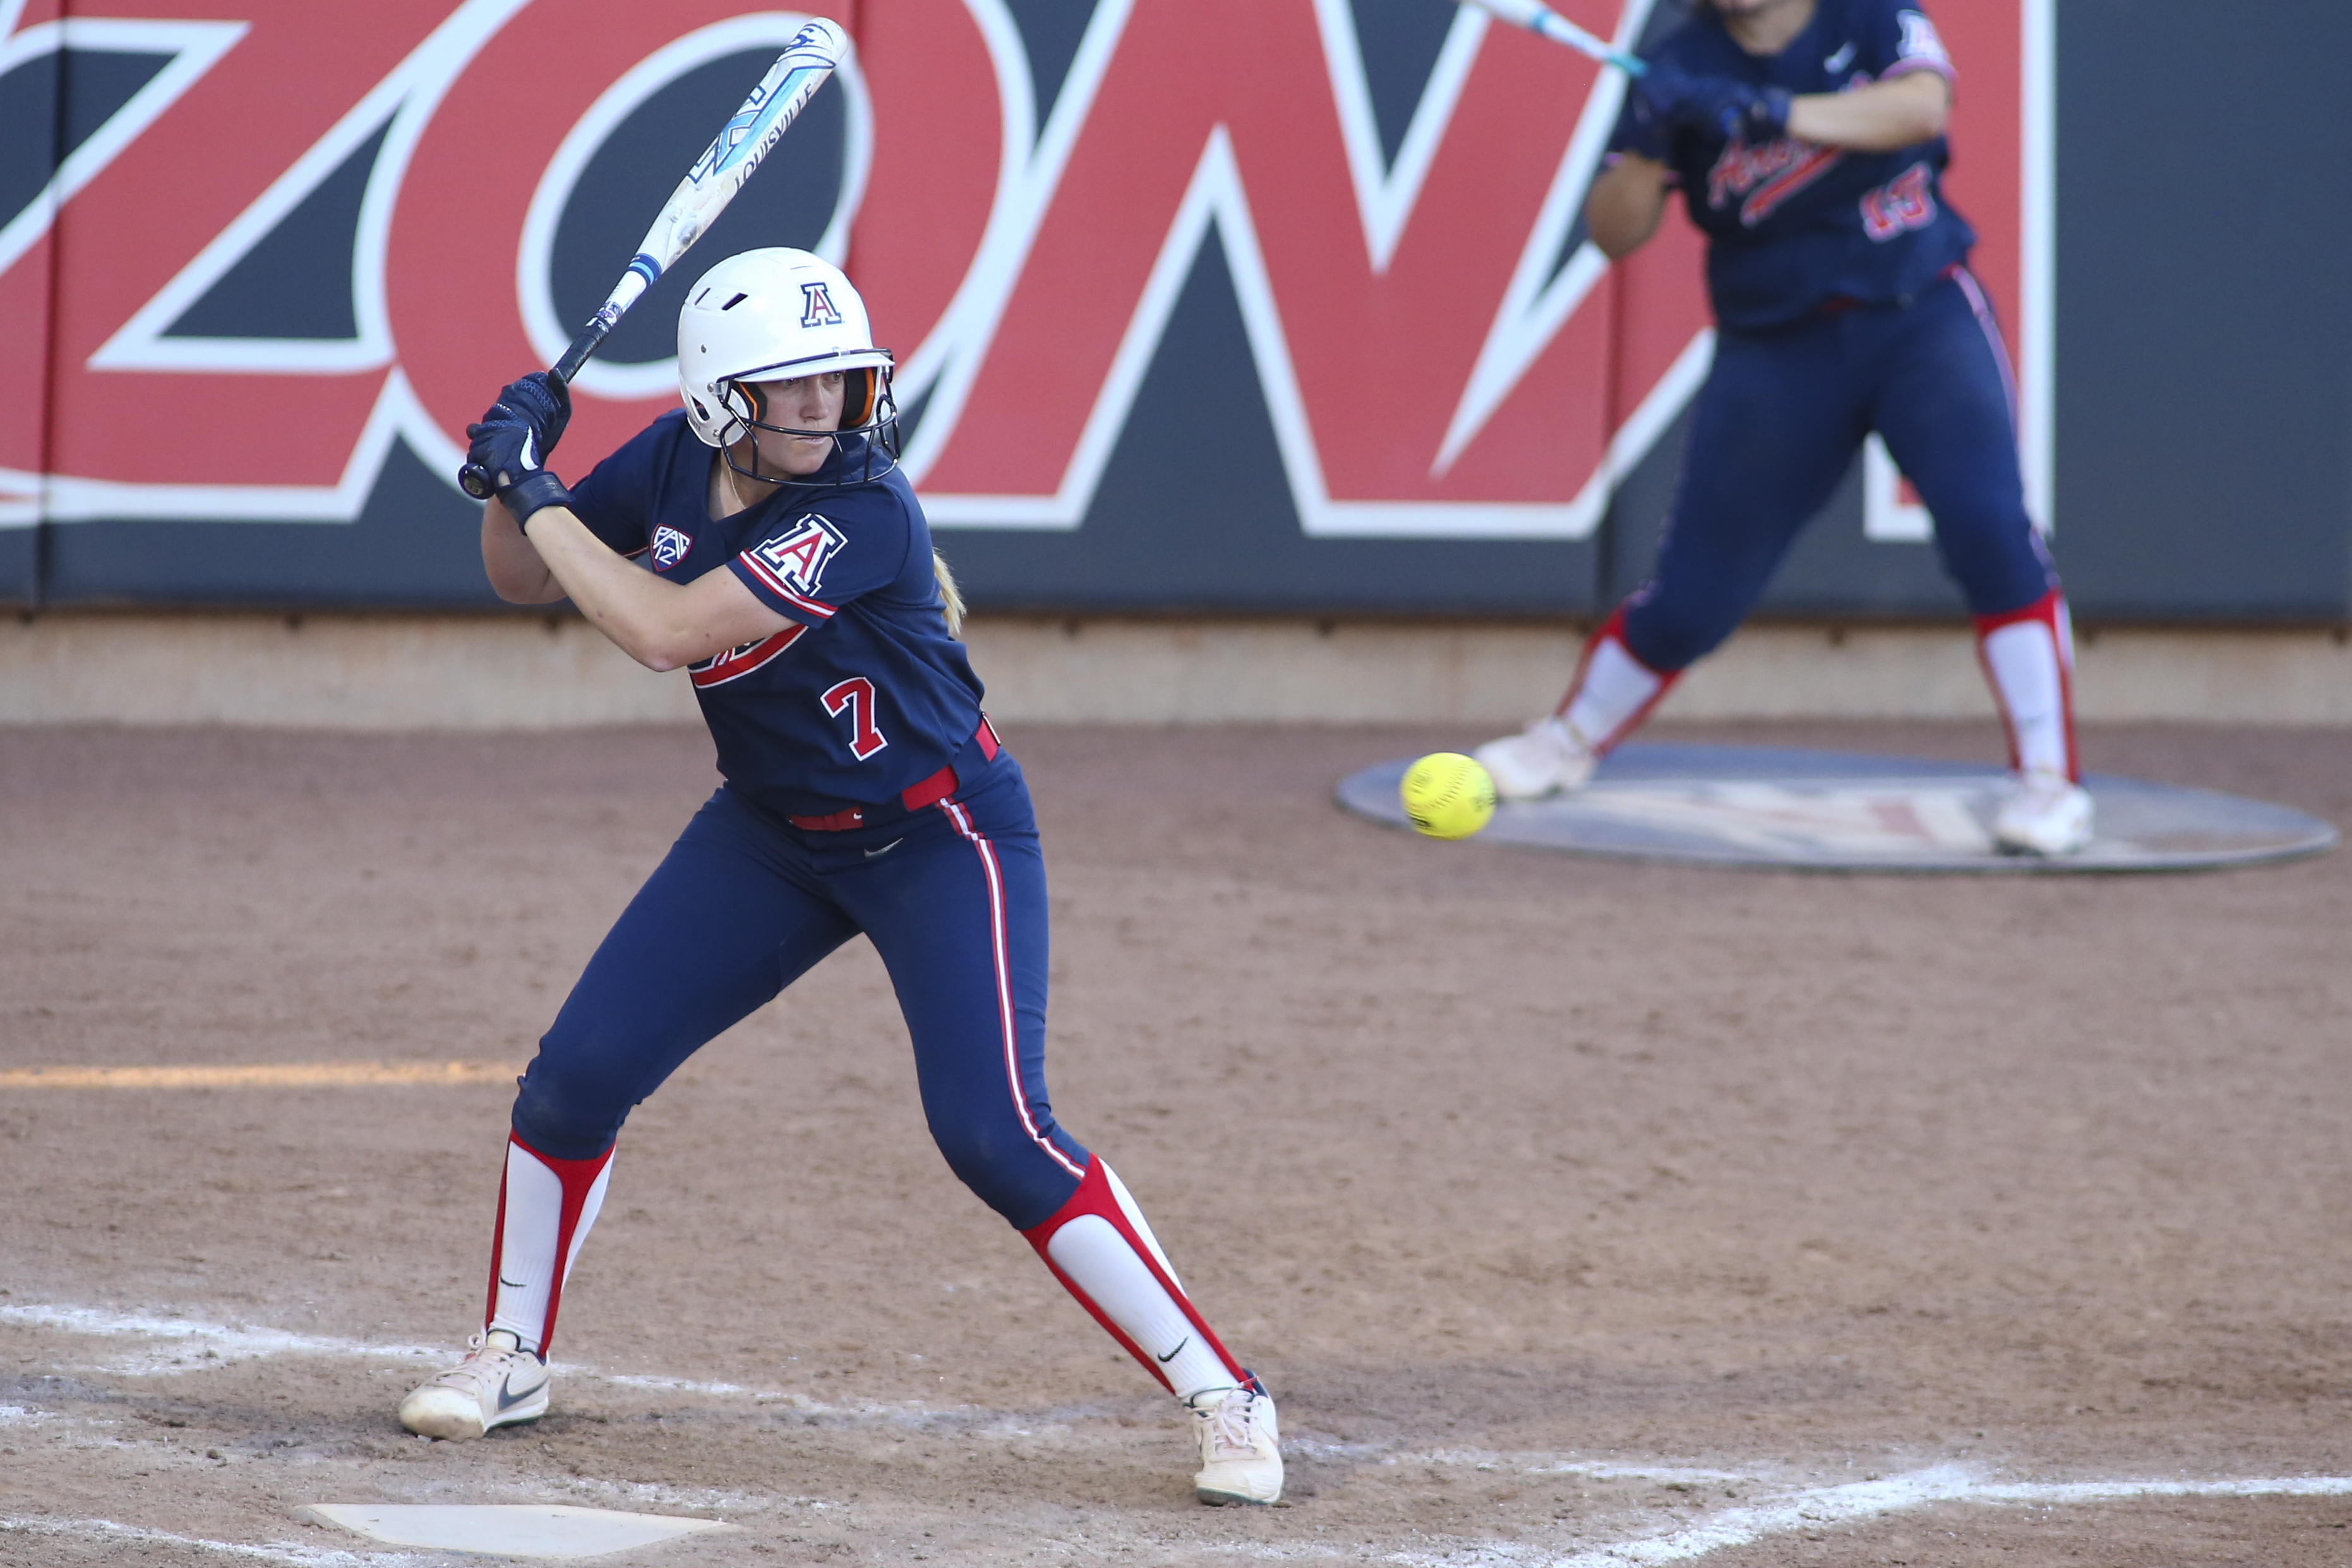 arizona-wildcats-baseball-softball-exhibitions-free-fall-scrimmages-chip-hale-caitlin-lowe-2022-2022